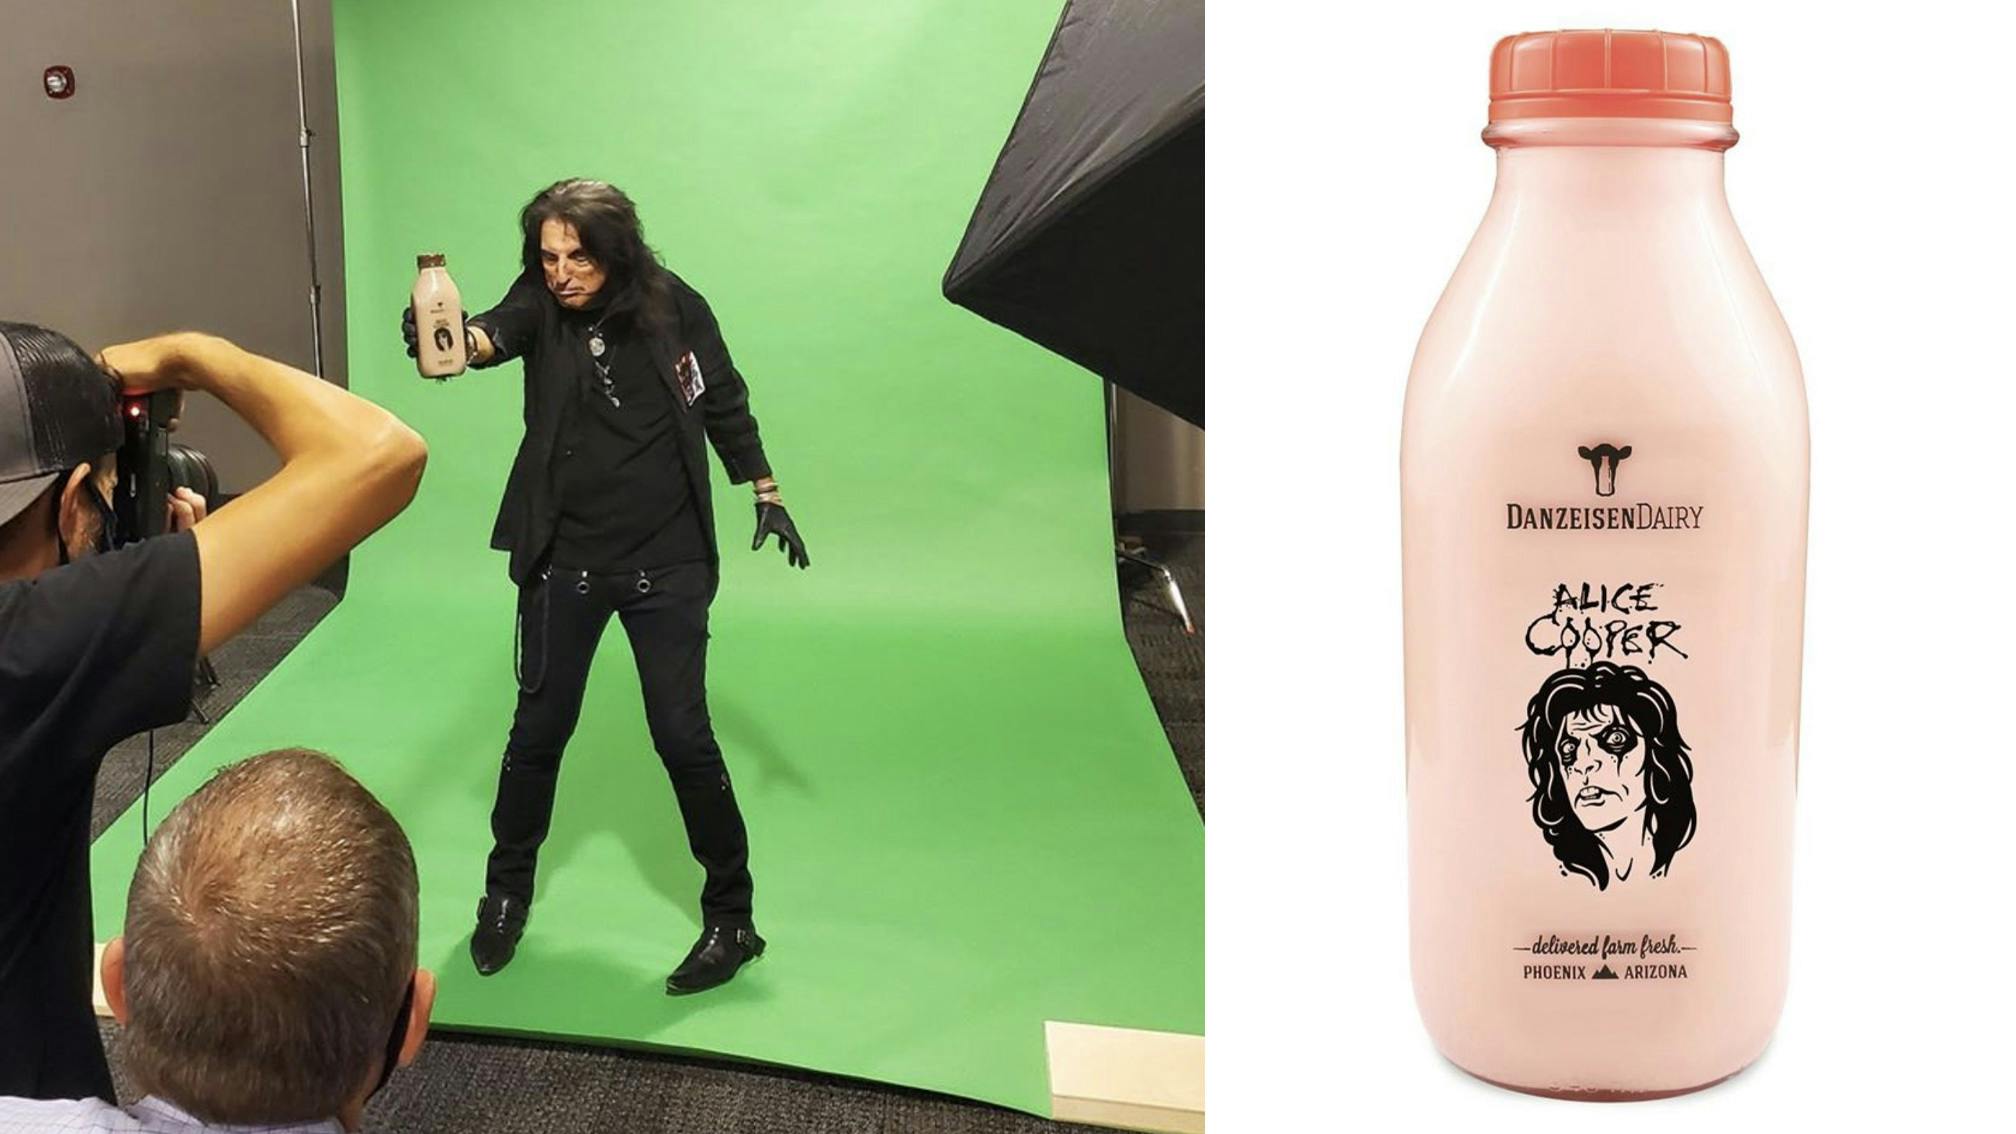 Alice Cooper To Release His Own Branded Chocolate Milk Bottle For Charity